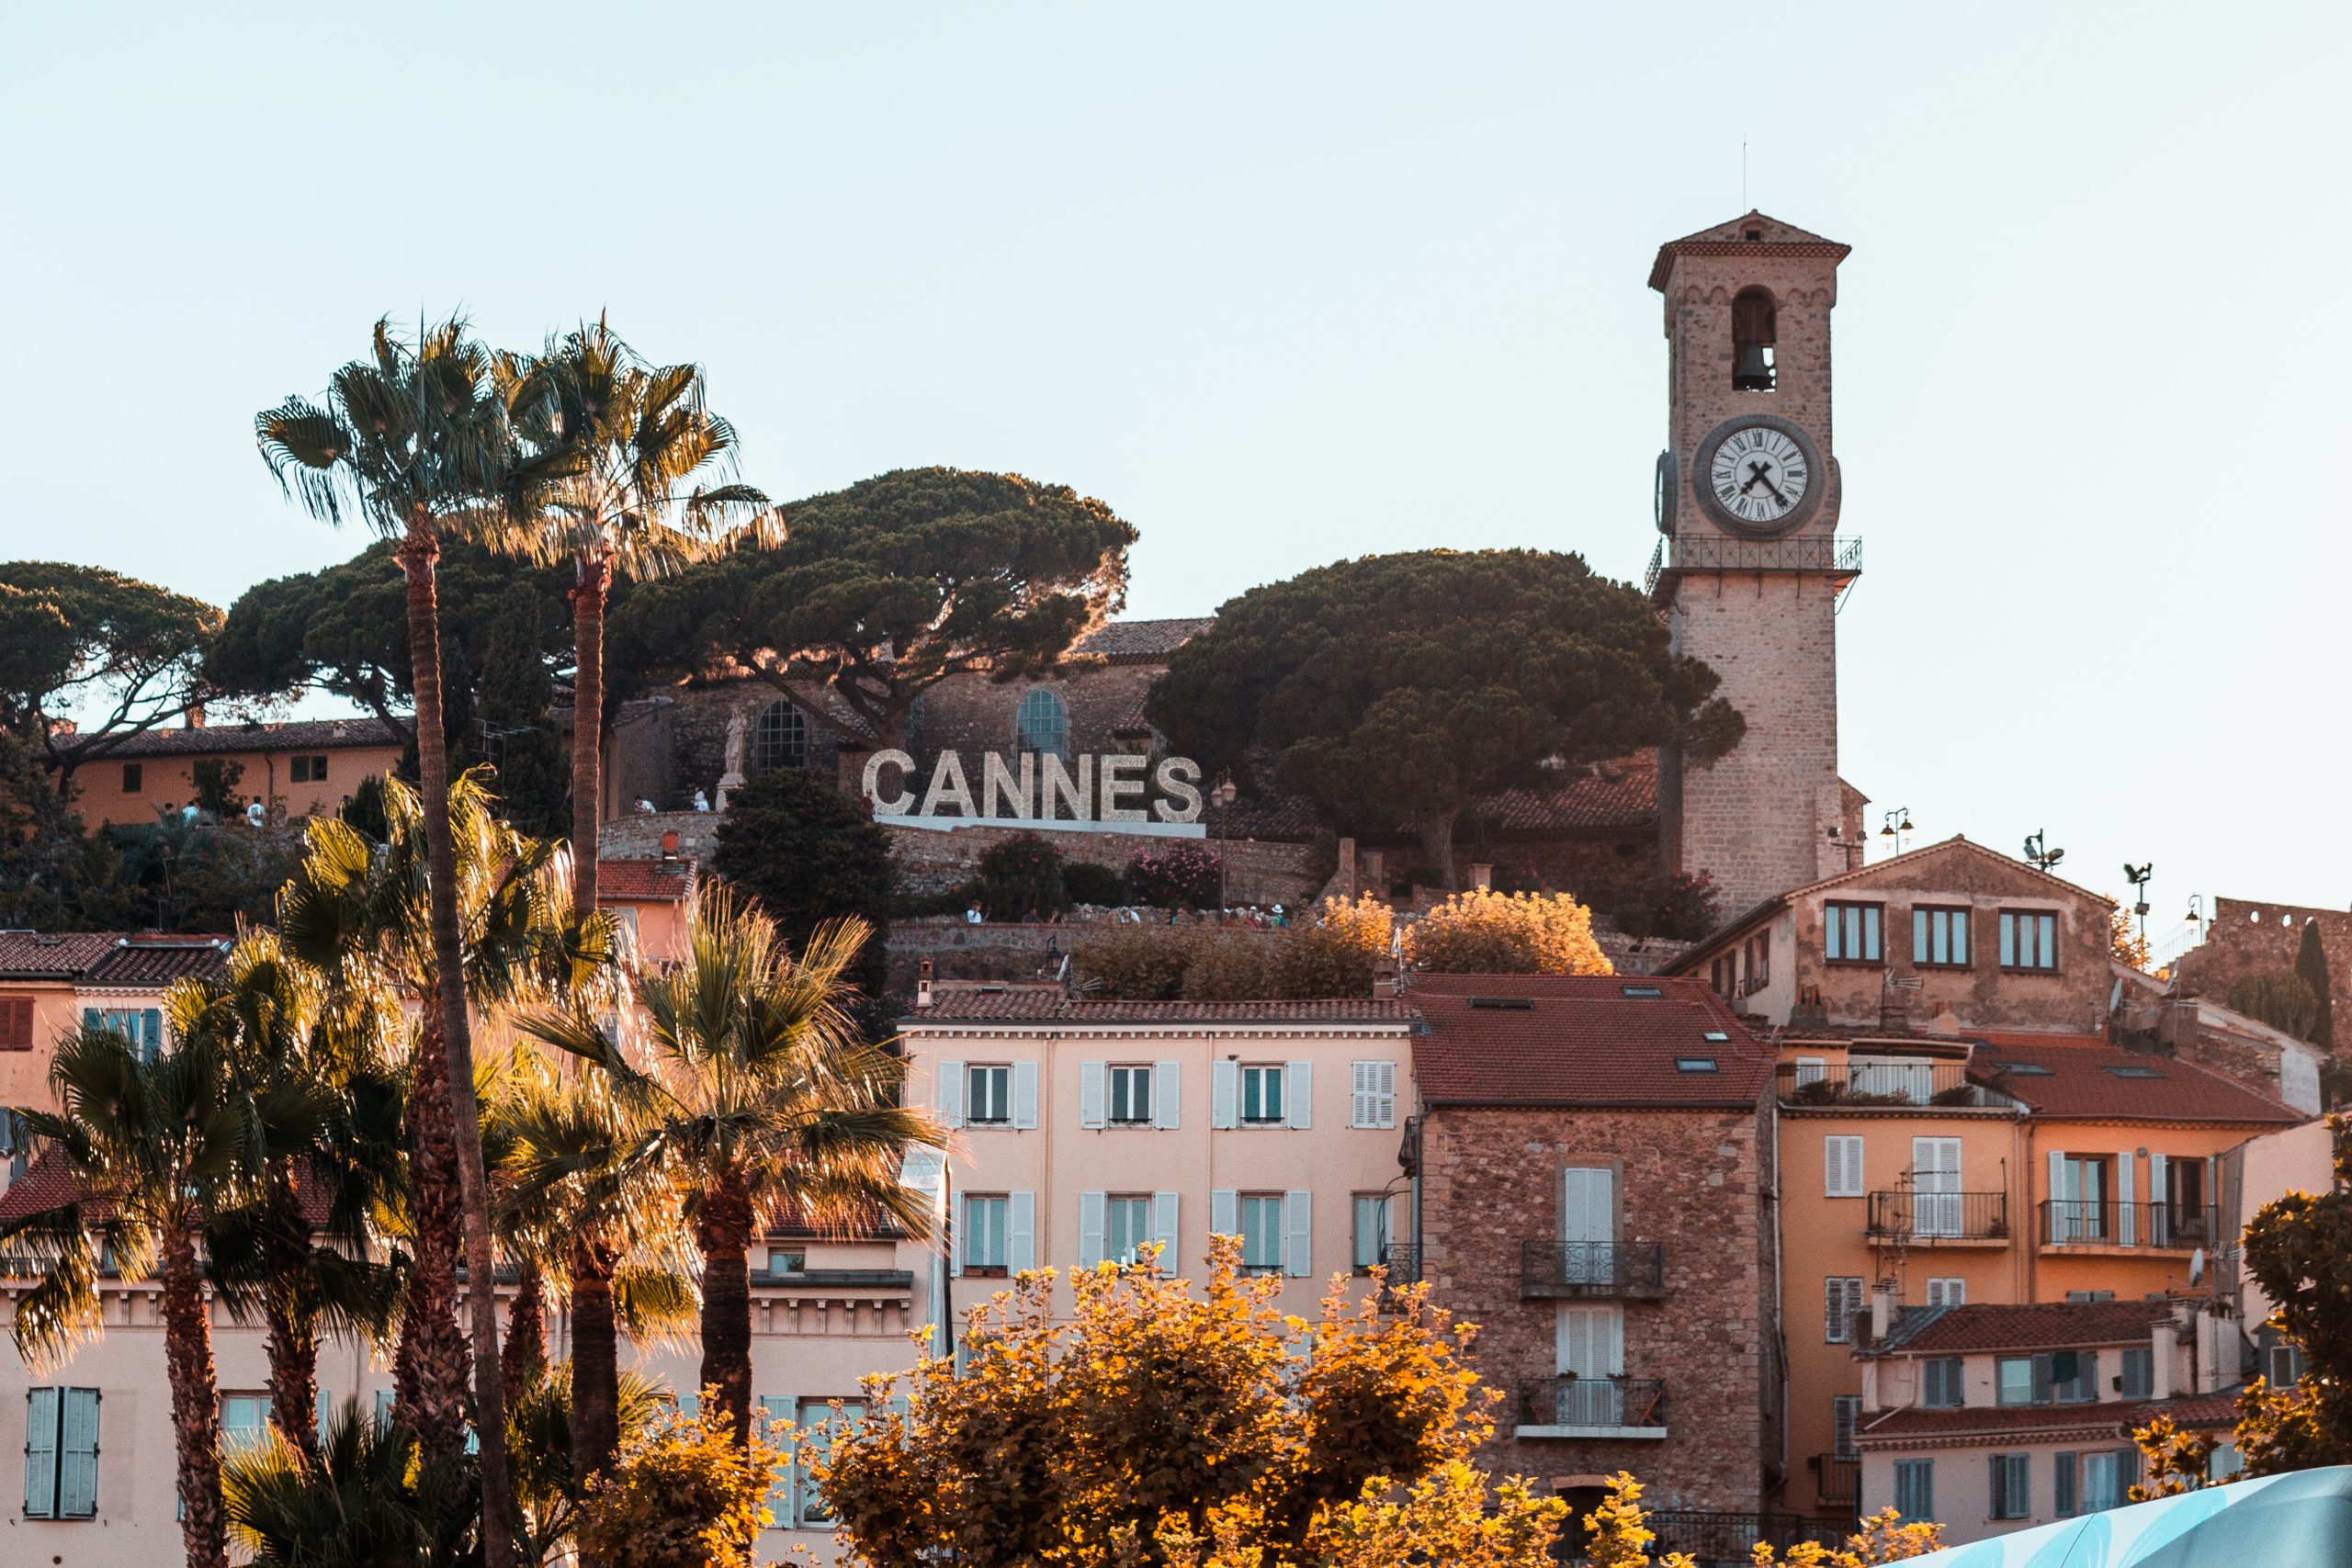 cannes hollywood hill sign coming from cruise ships